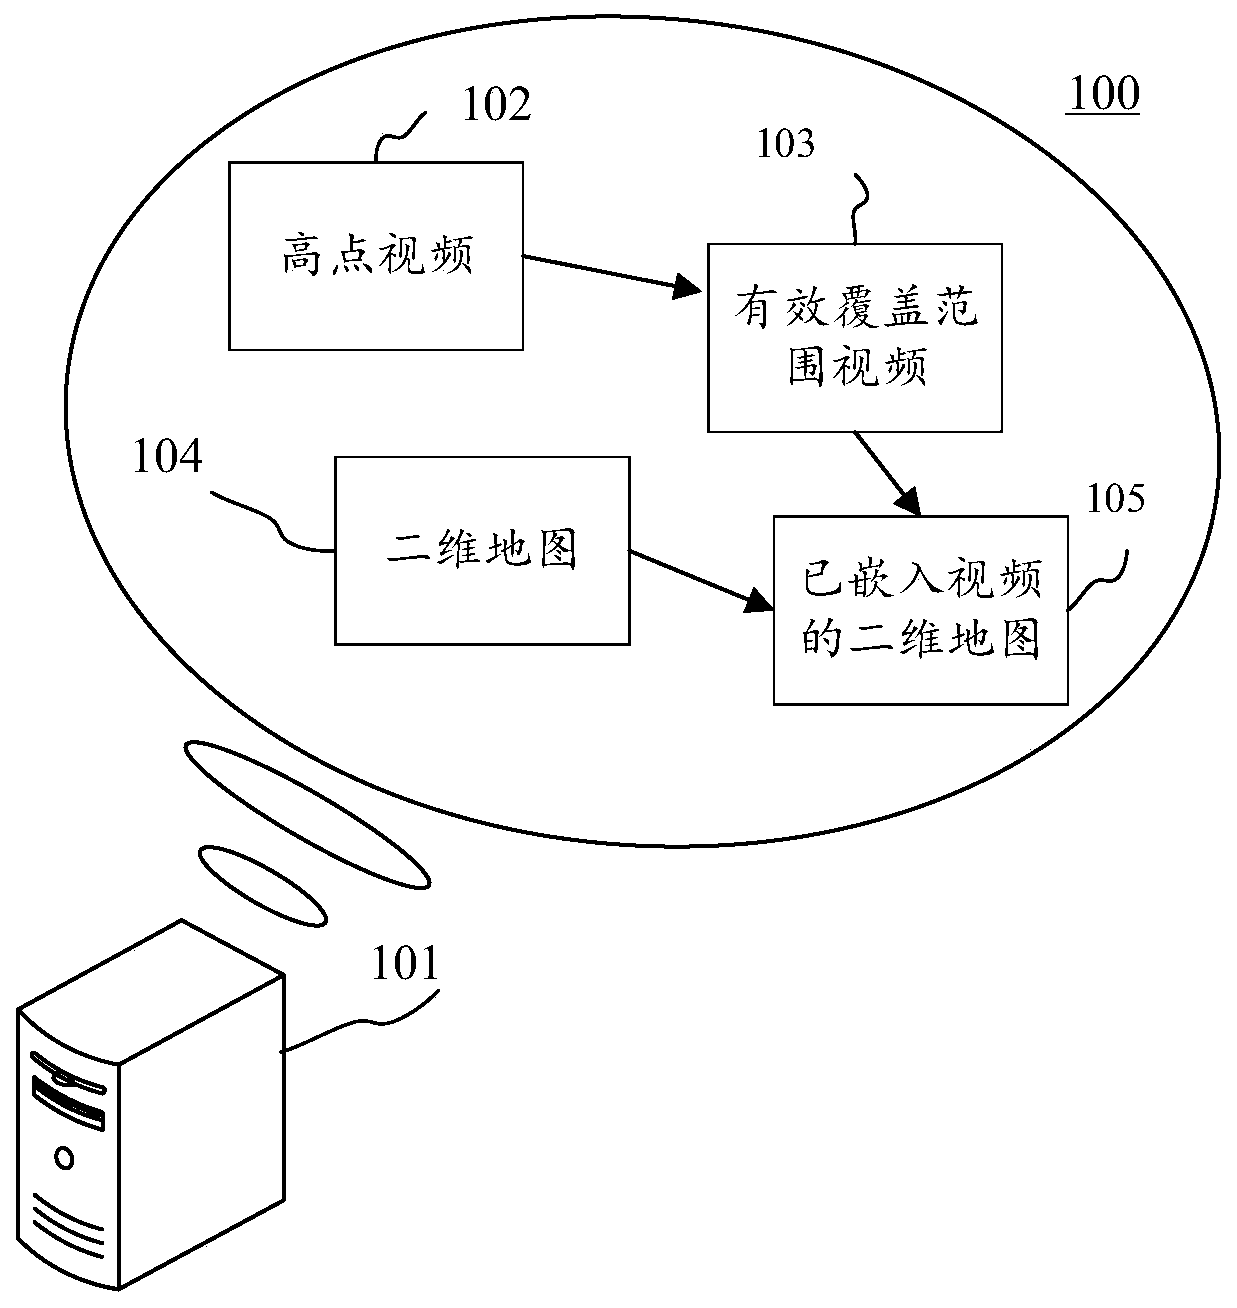 Method for embedding video into two-dimensional map